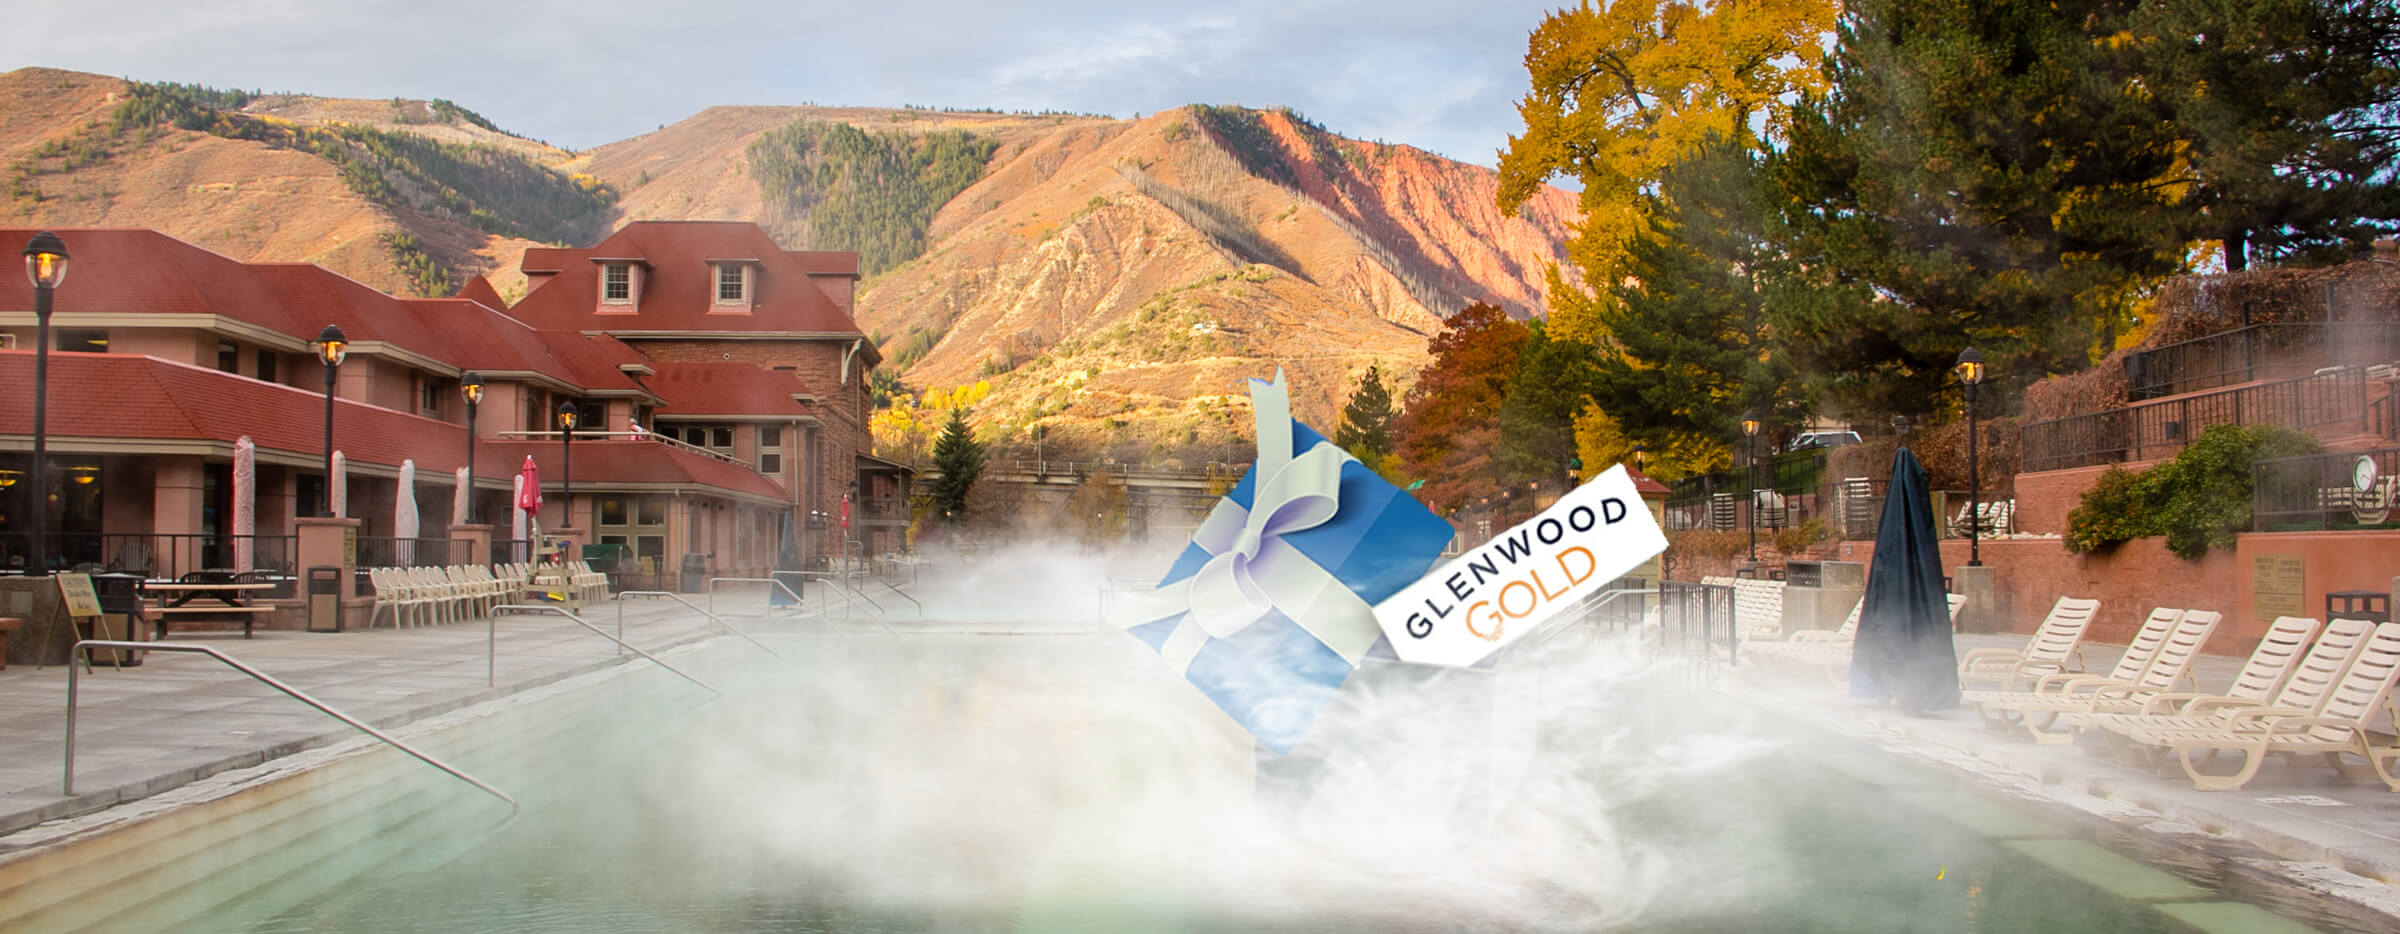 Glenwood Gold Welcome Offering from Glenwood Springs, CO